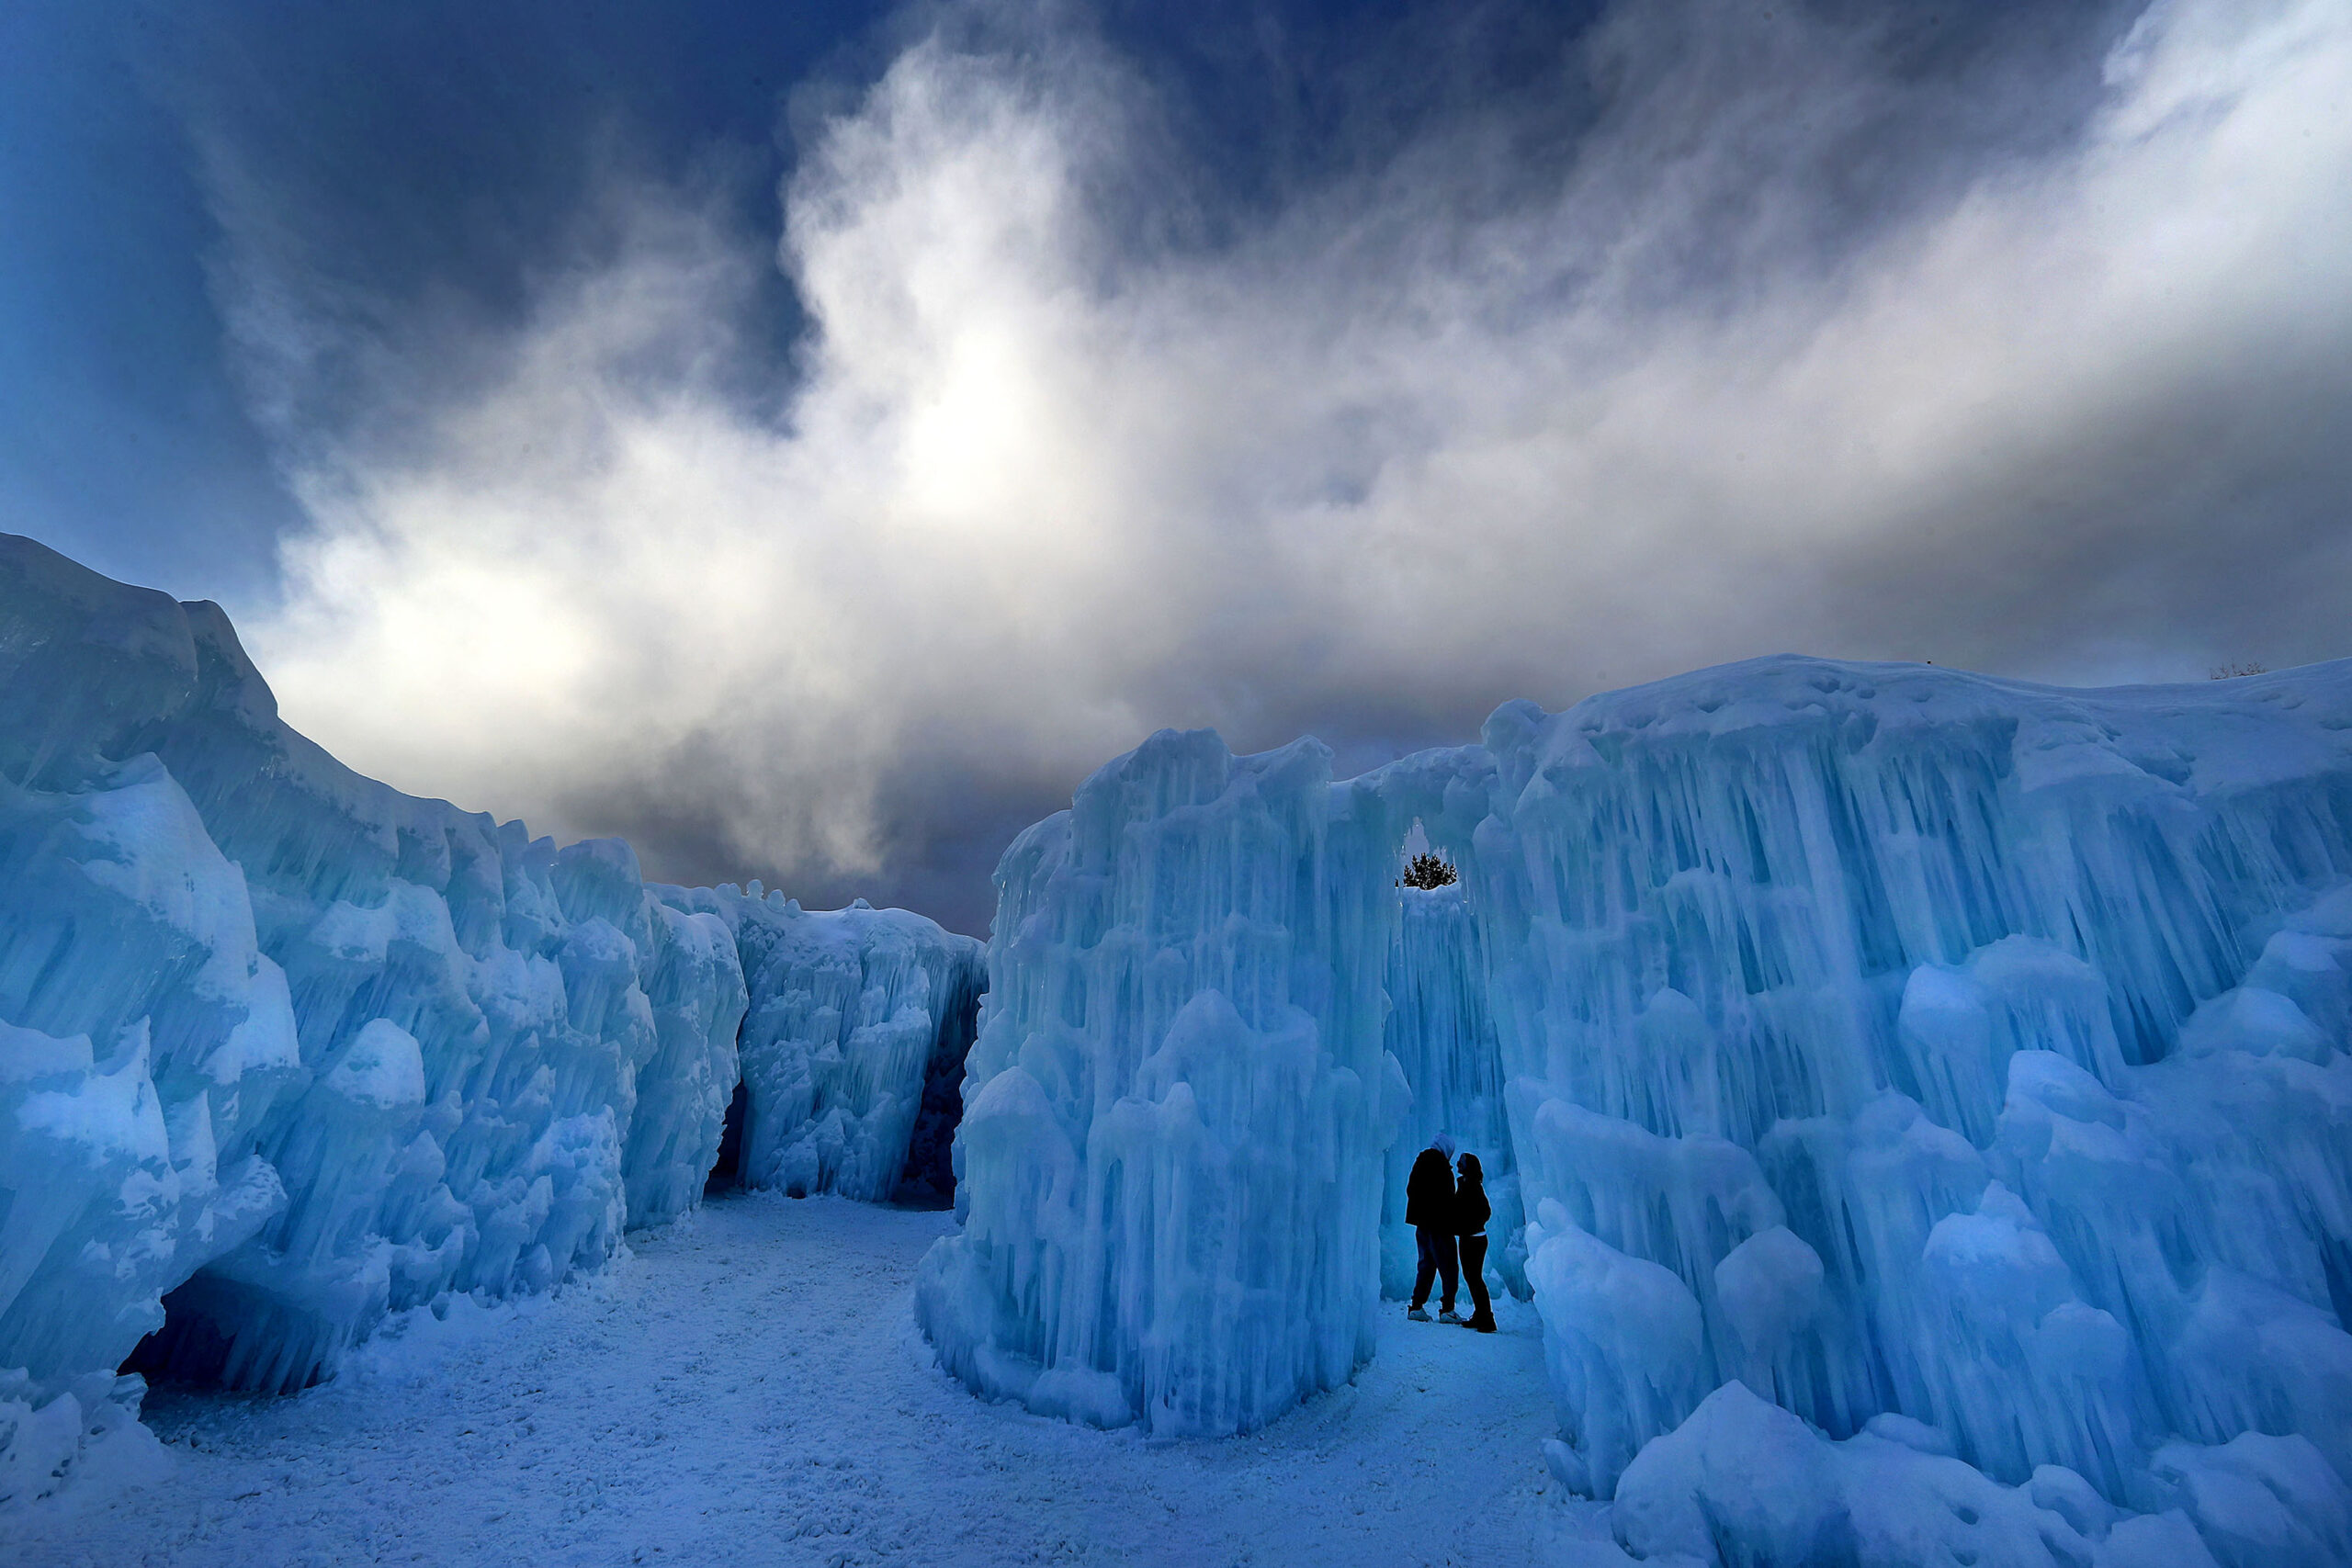 A guide for visiting the Ice Castles in New Hampshire